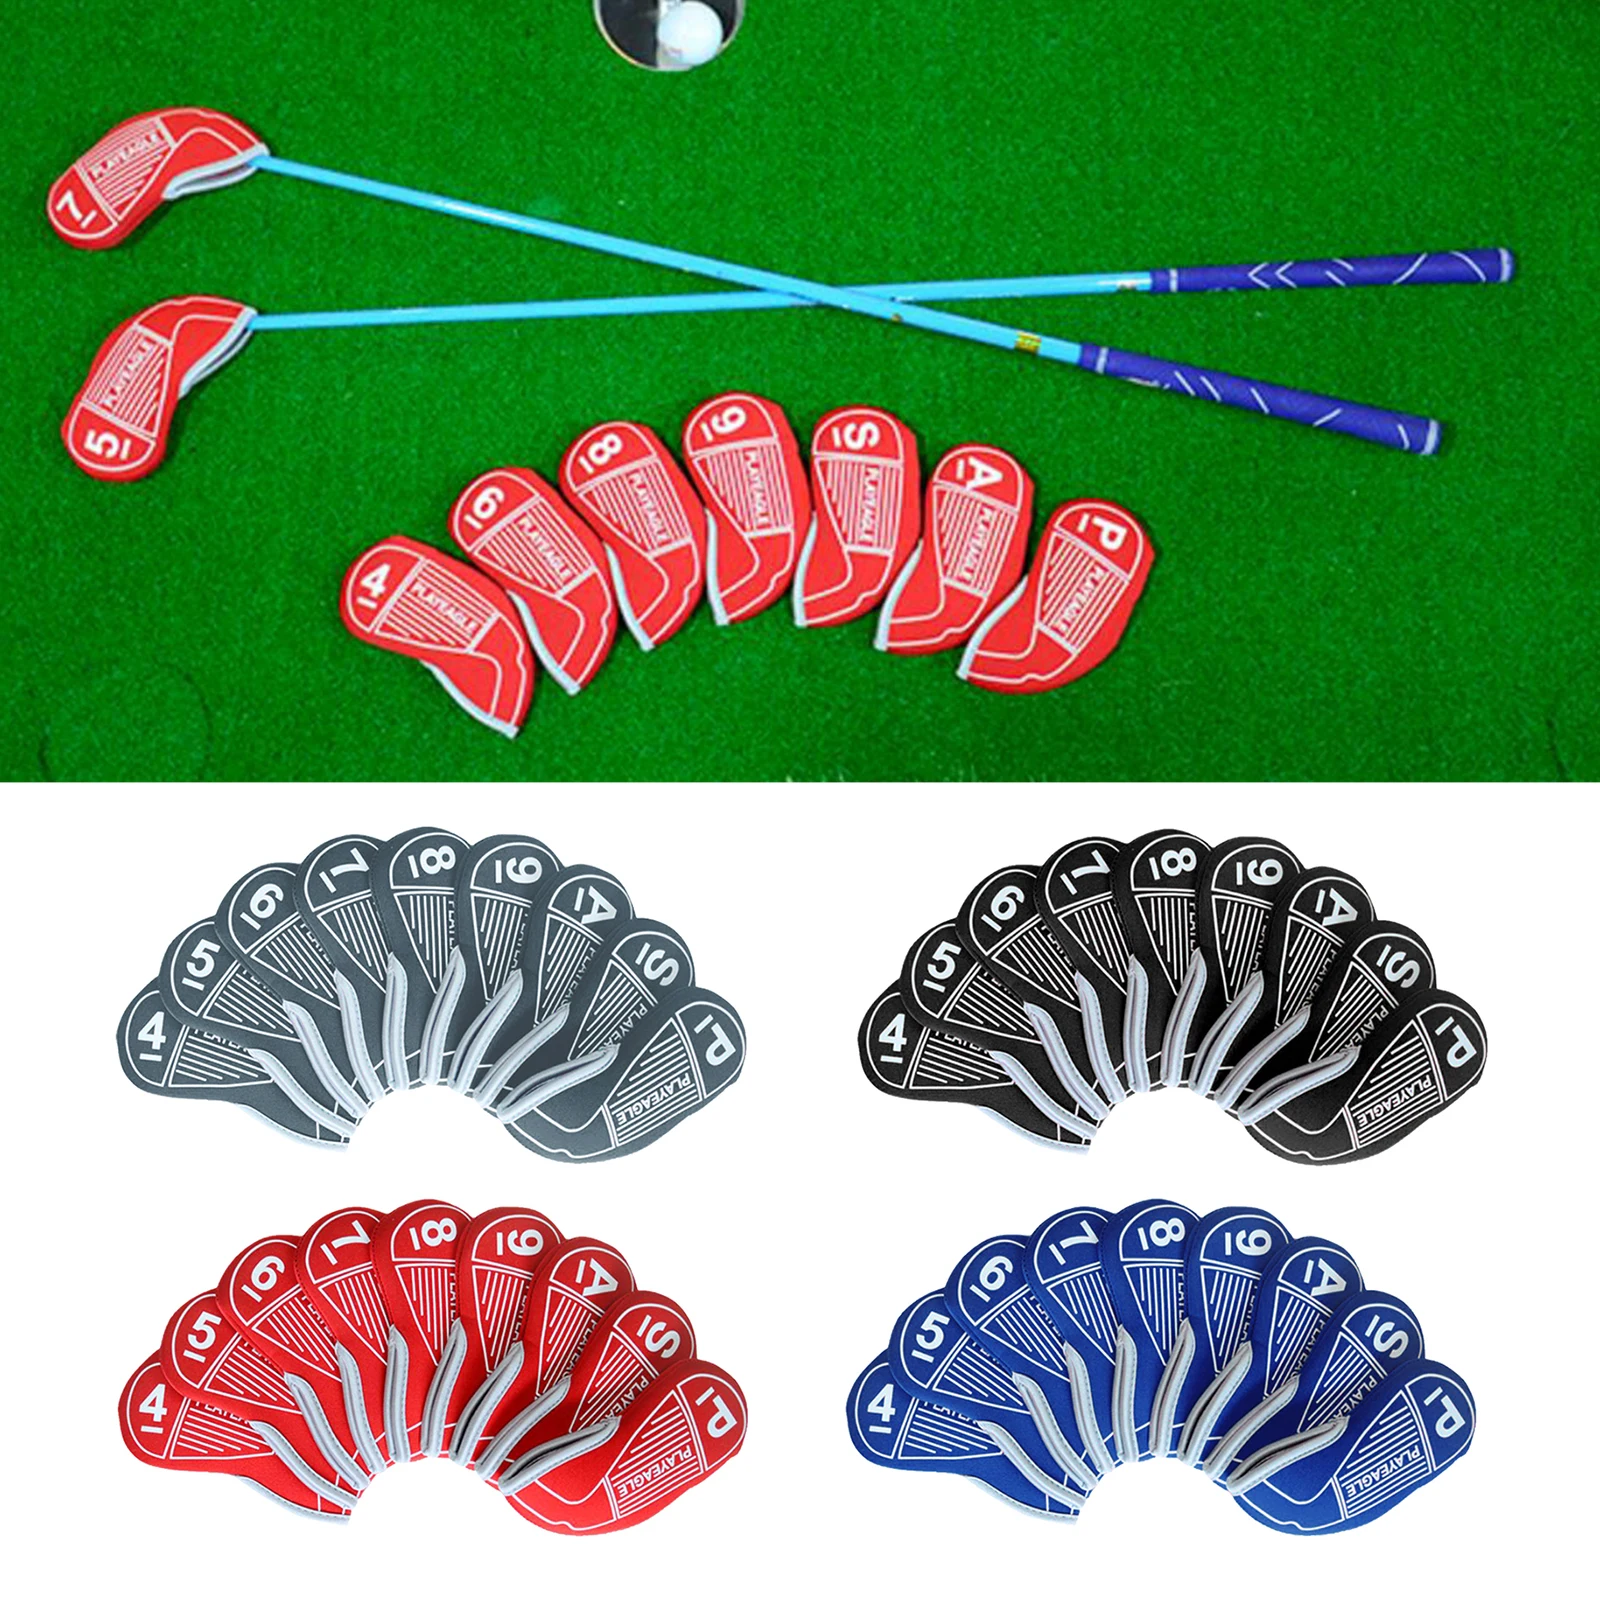 

9Pack Neoprene Golf Iron Headcover Wedges Club Head Cover Protection Guard